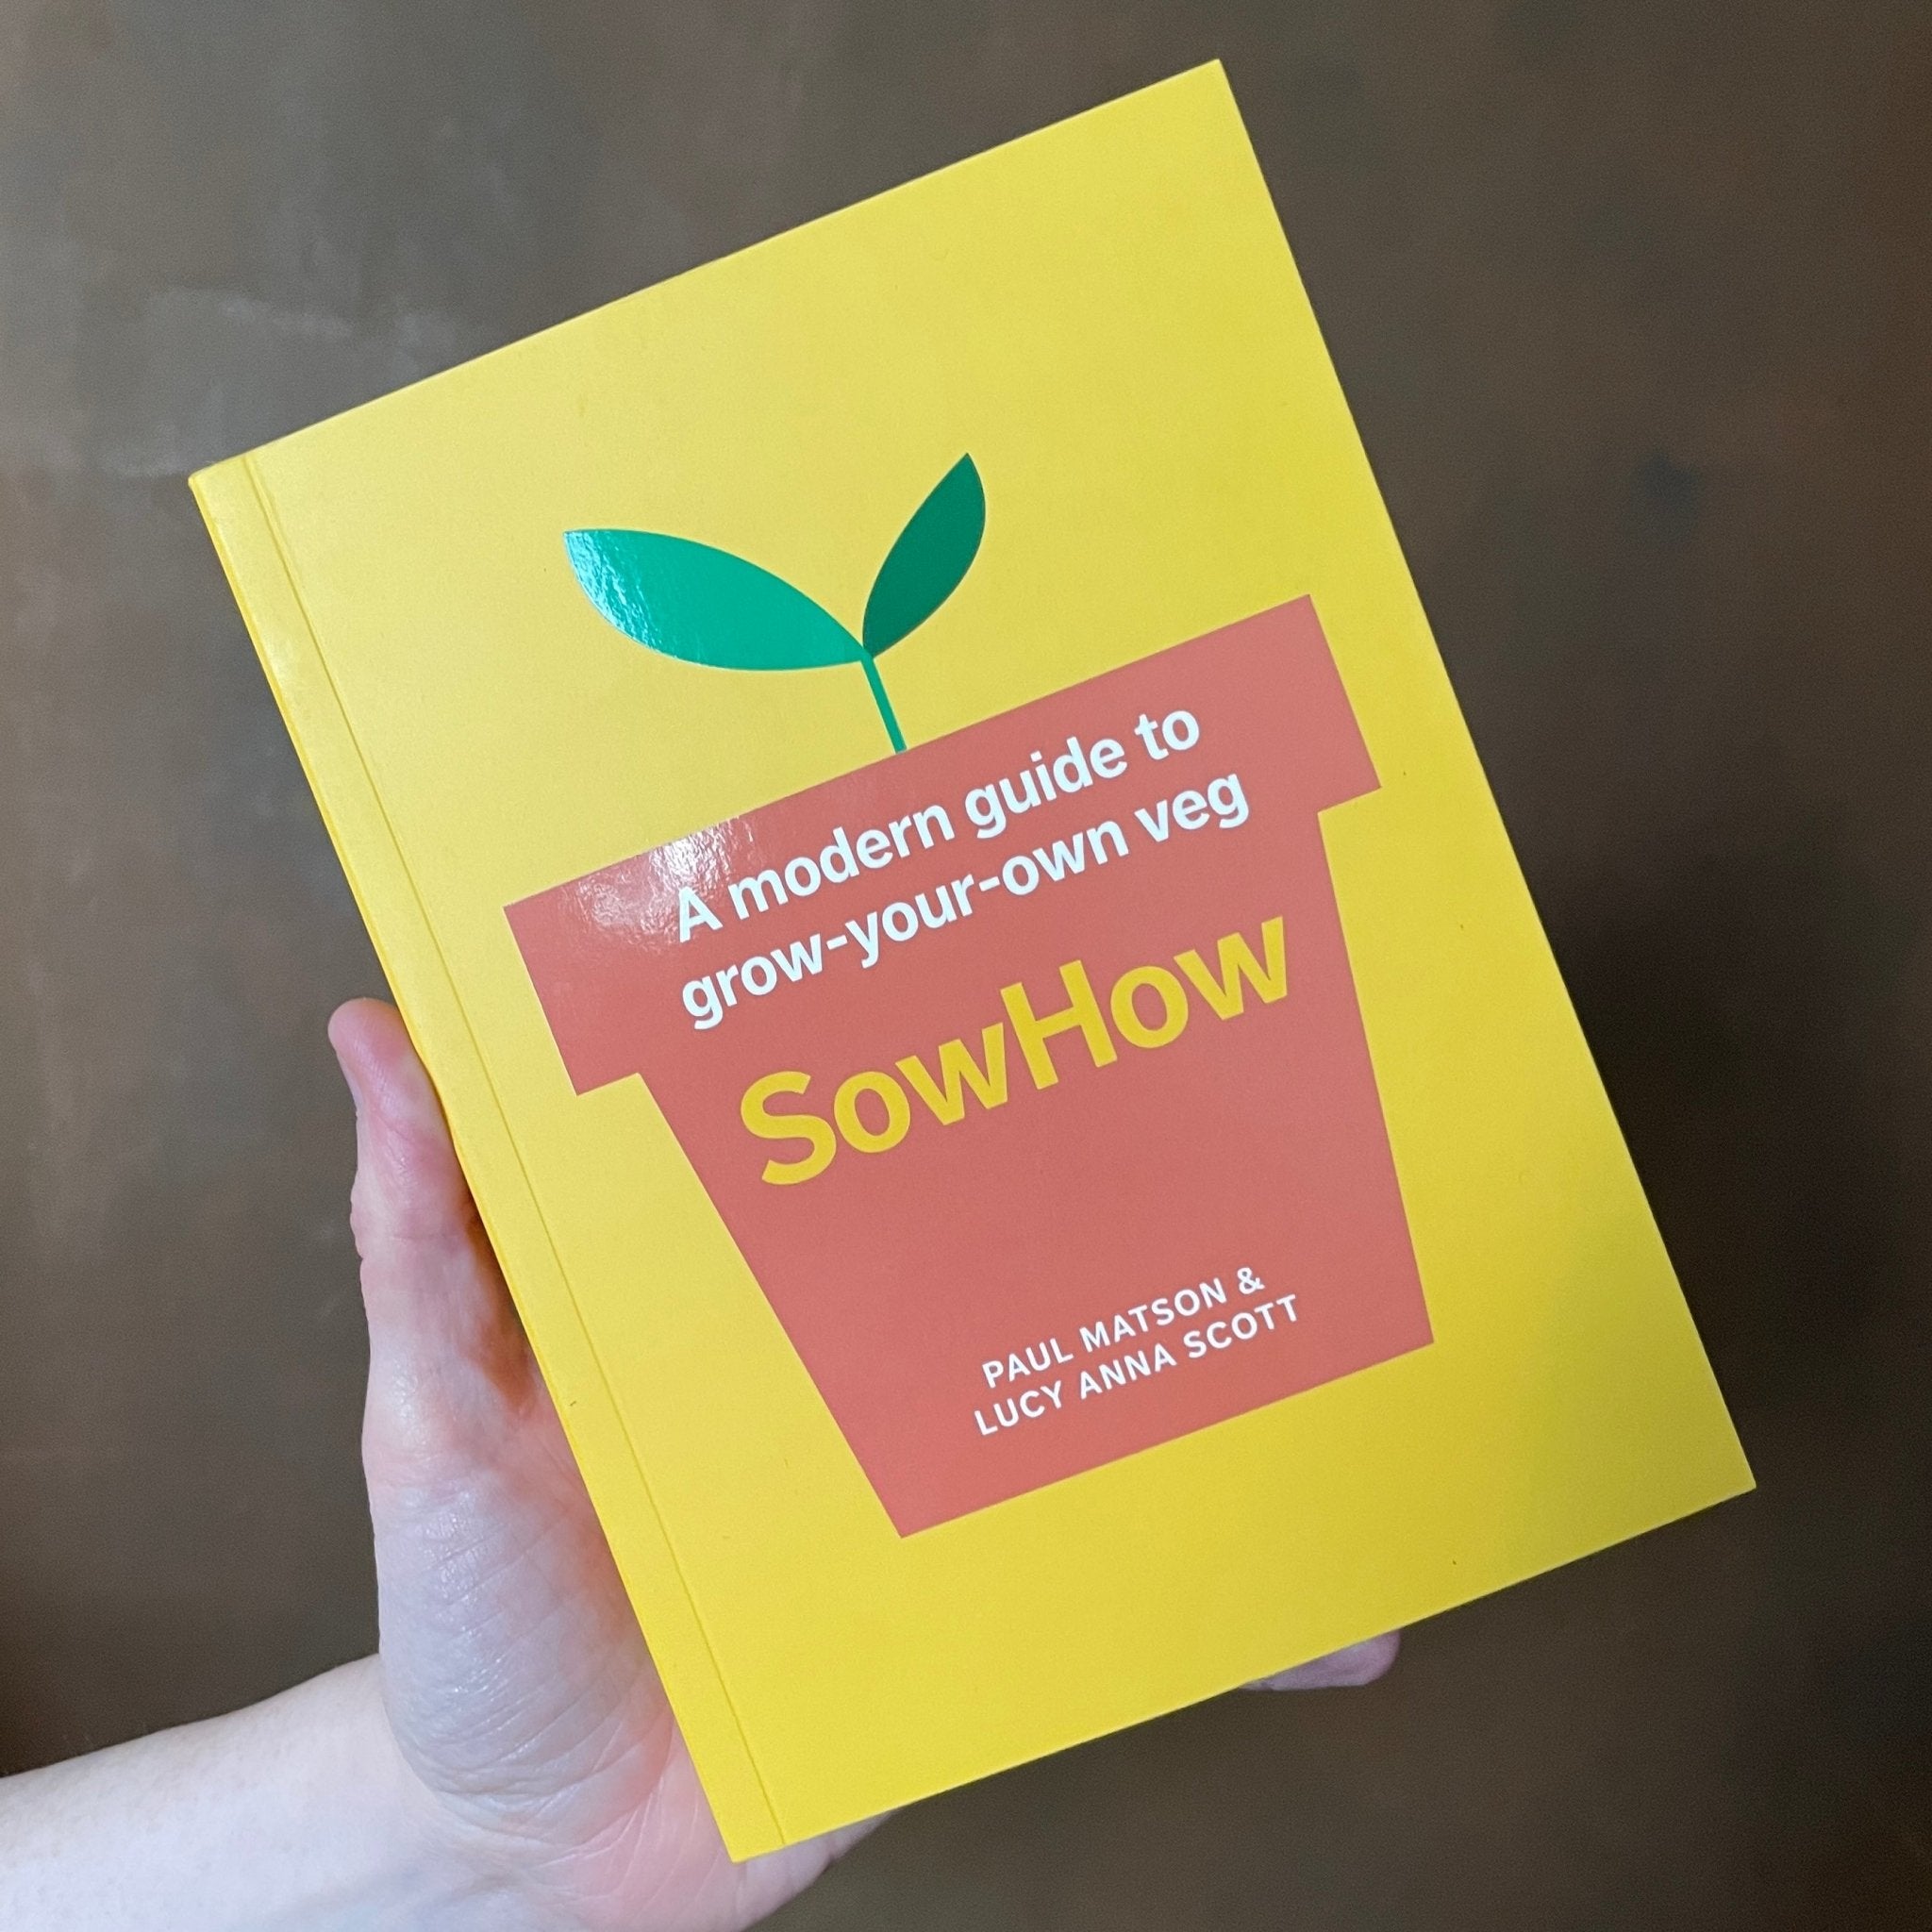 SowHow: A Modern Guide to Grow-Your-Own Veg - grow urban. UK